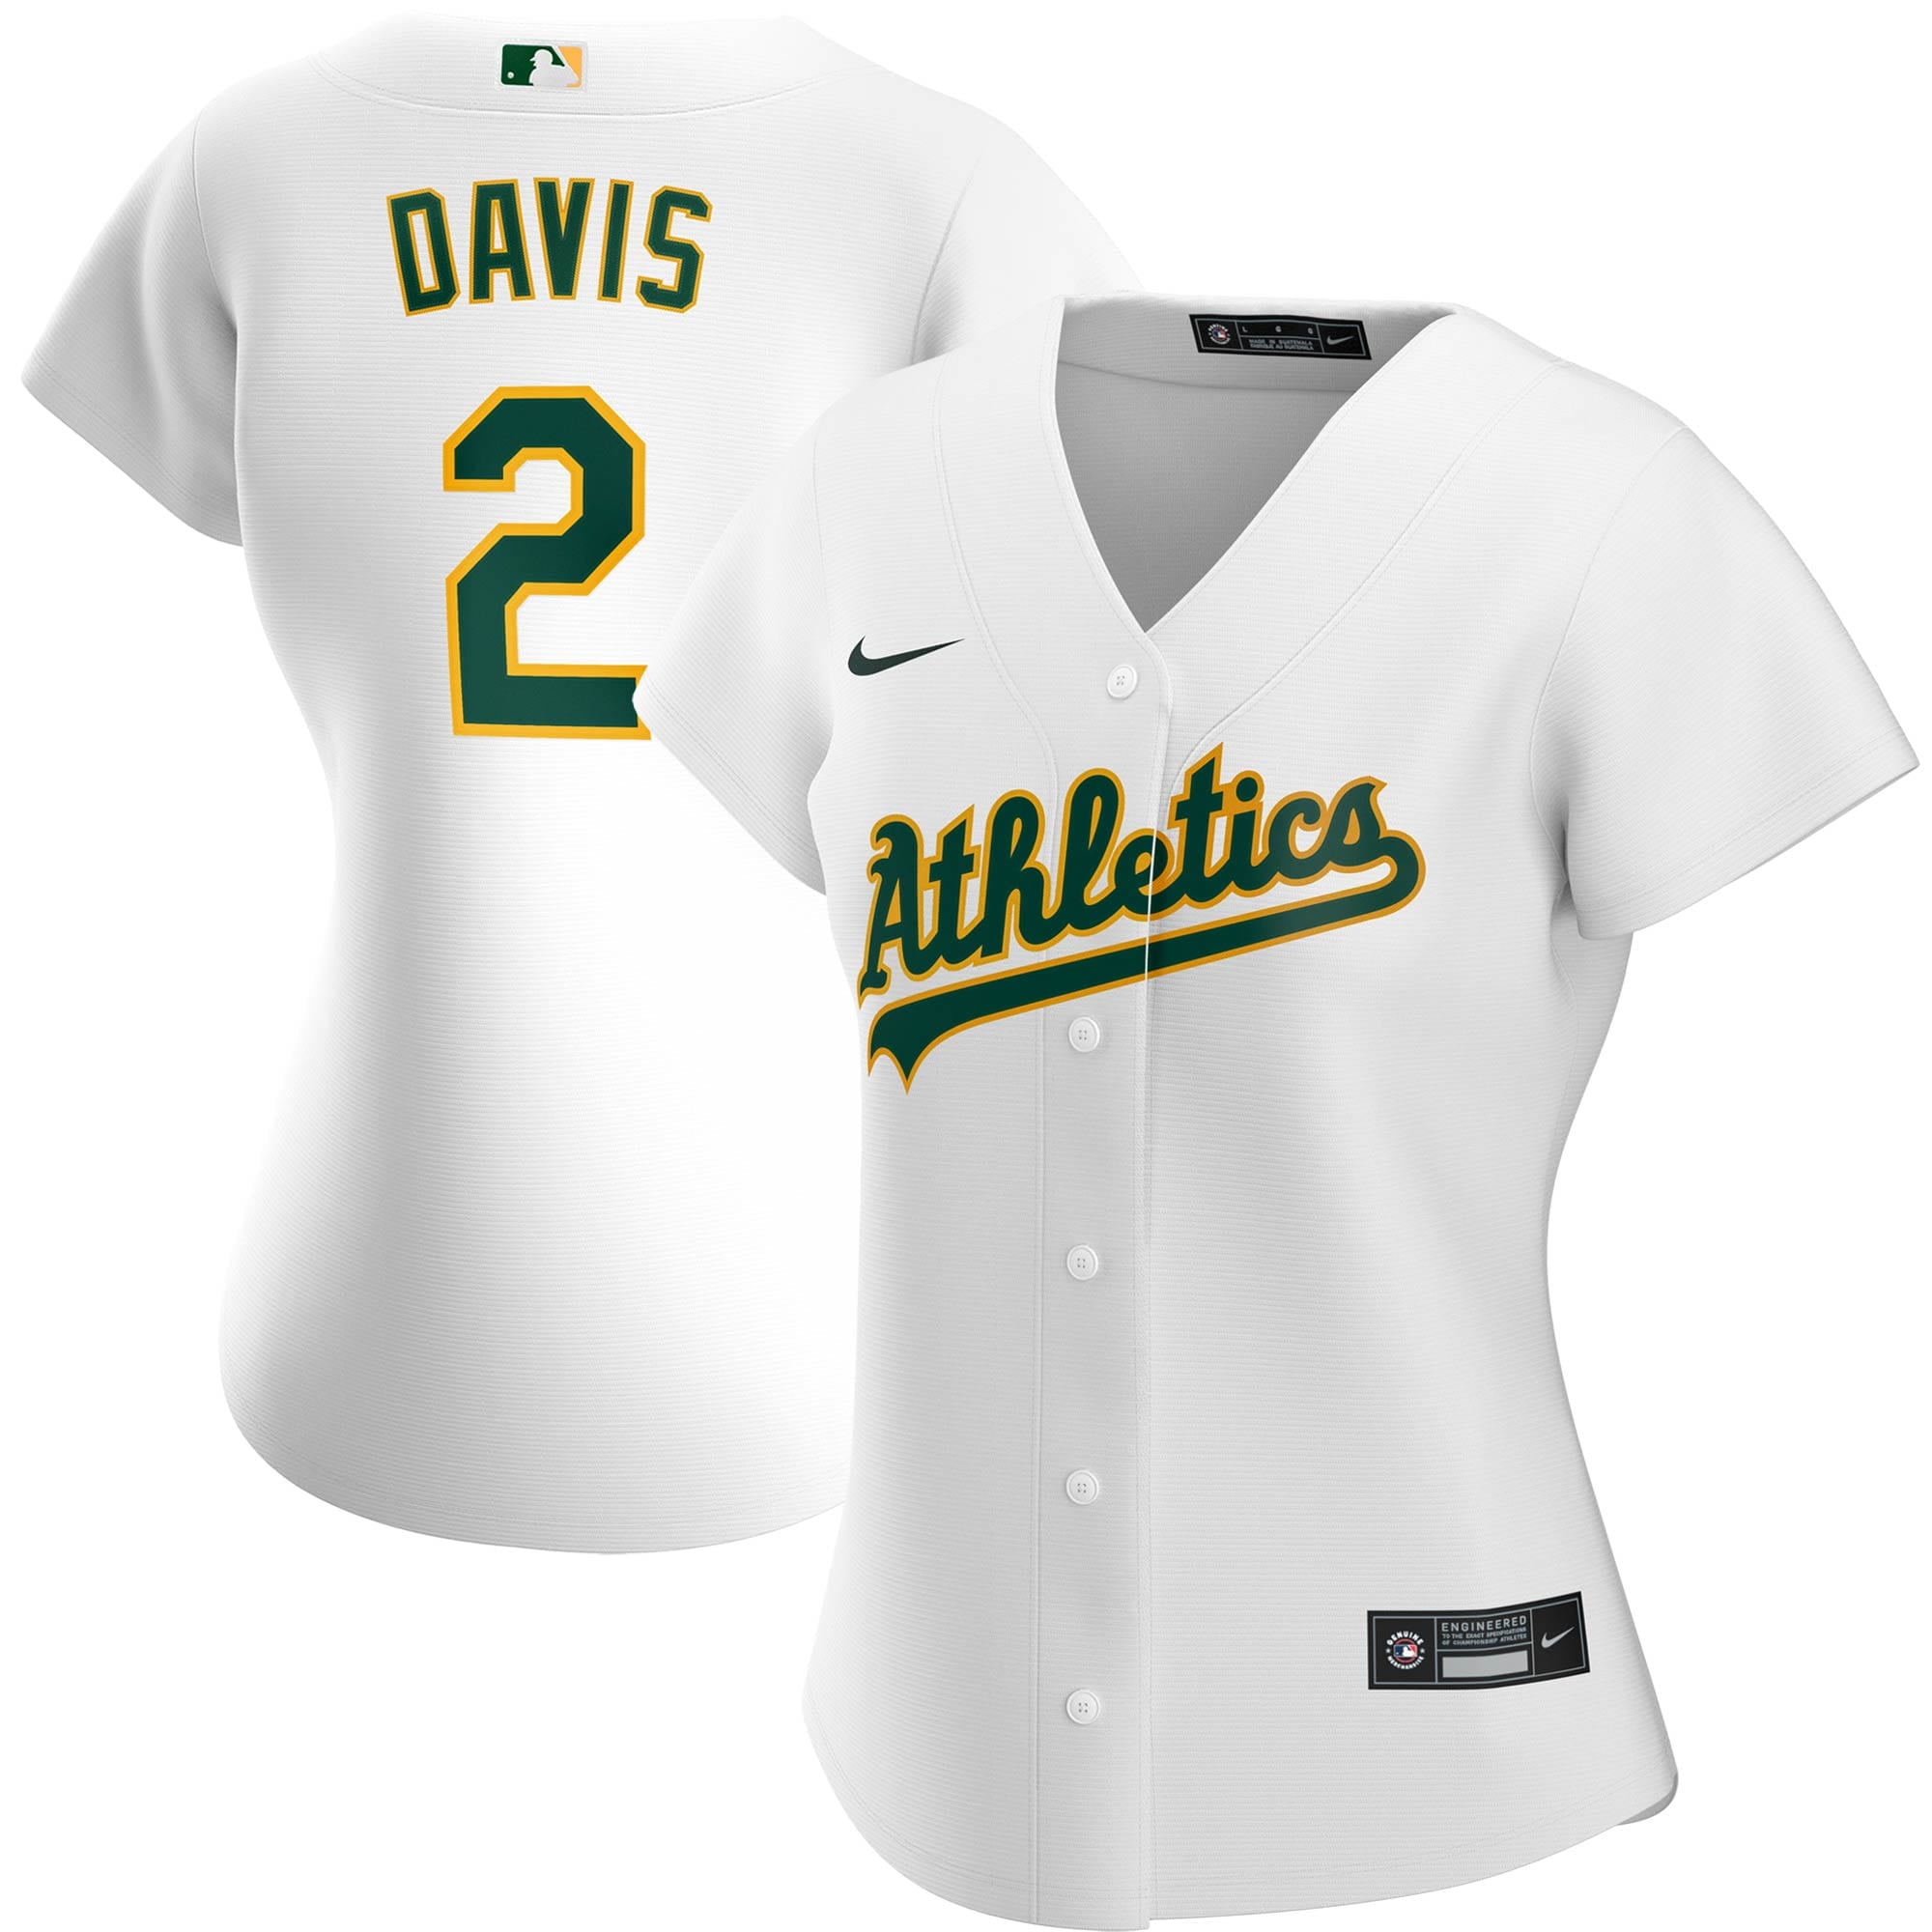 oakland a's white jersey